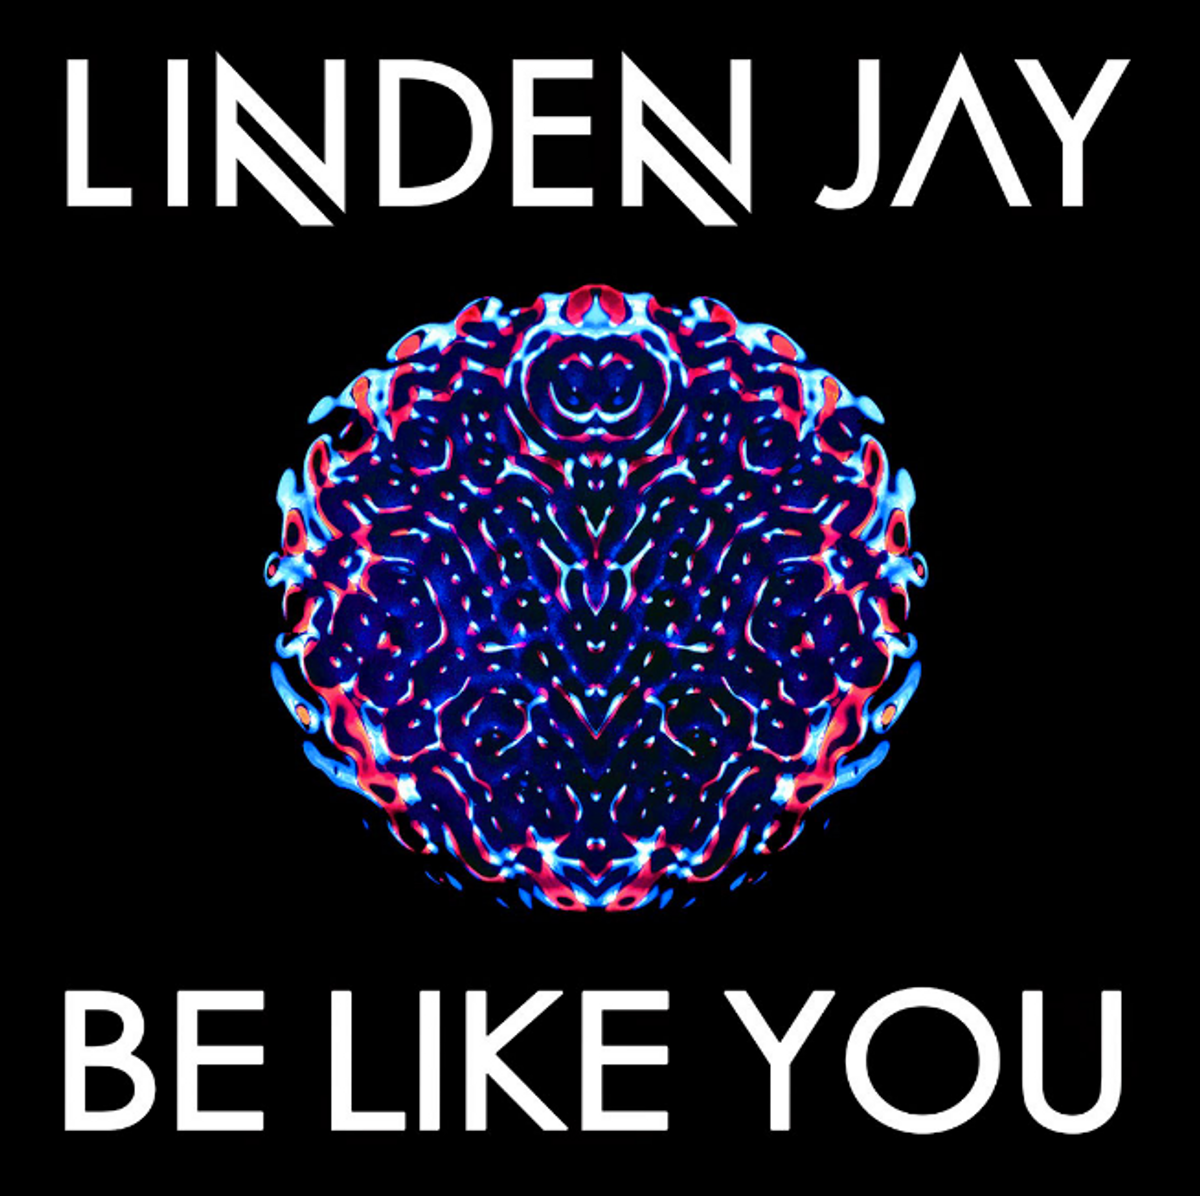 Mura Masa Releases Must Hear Remix Of Linden Jay's "Be Like You"